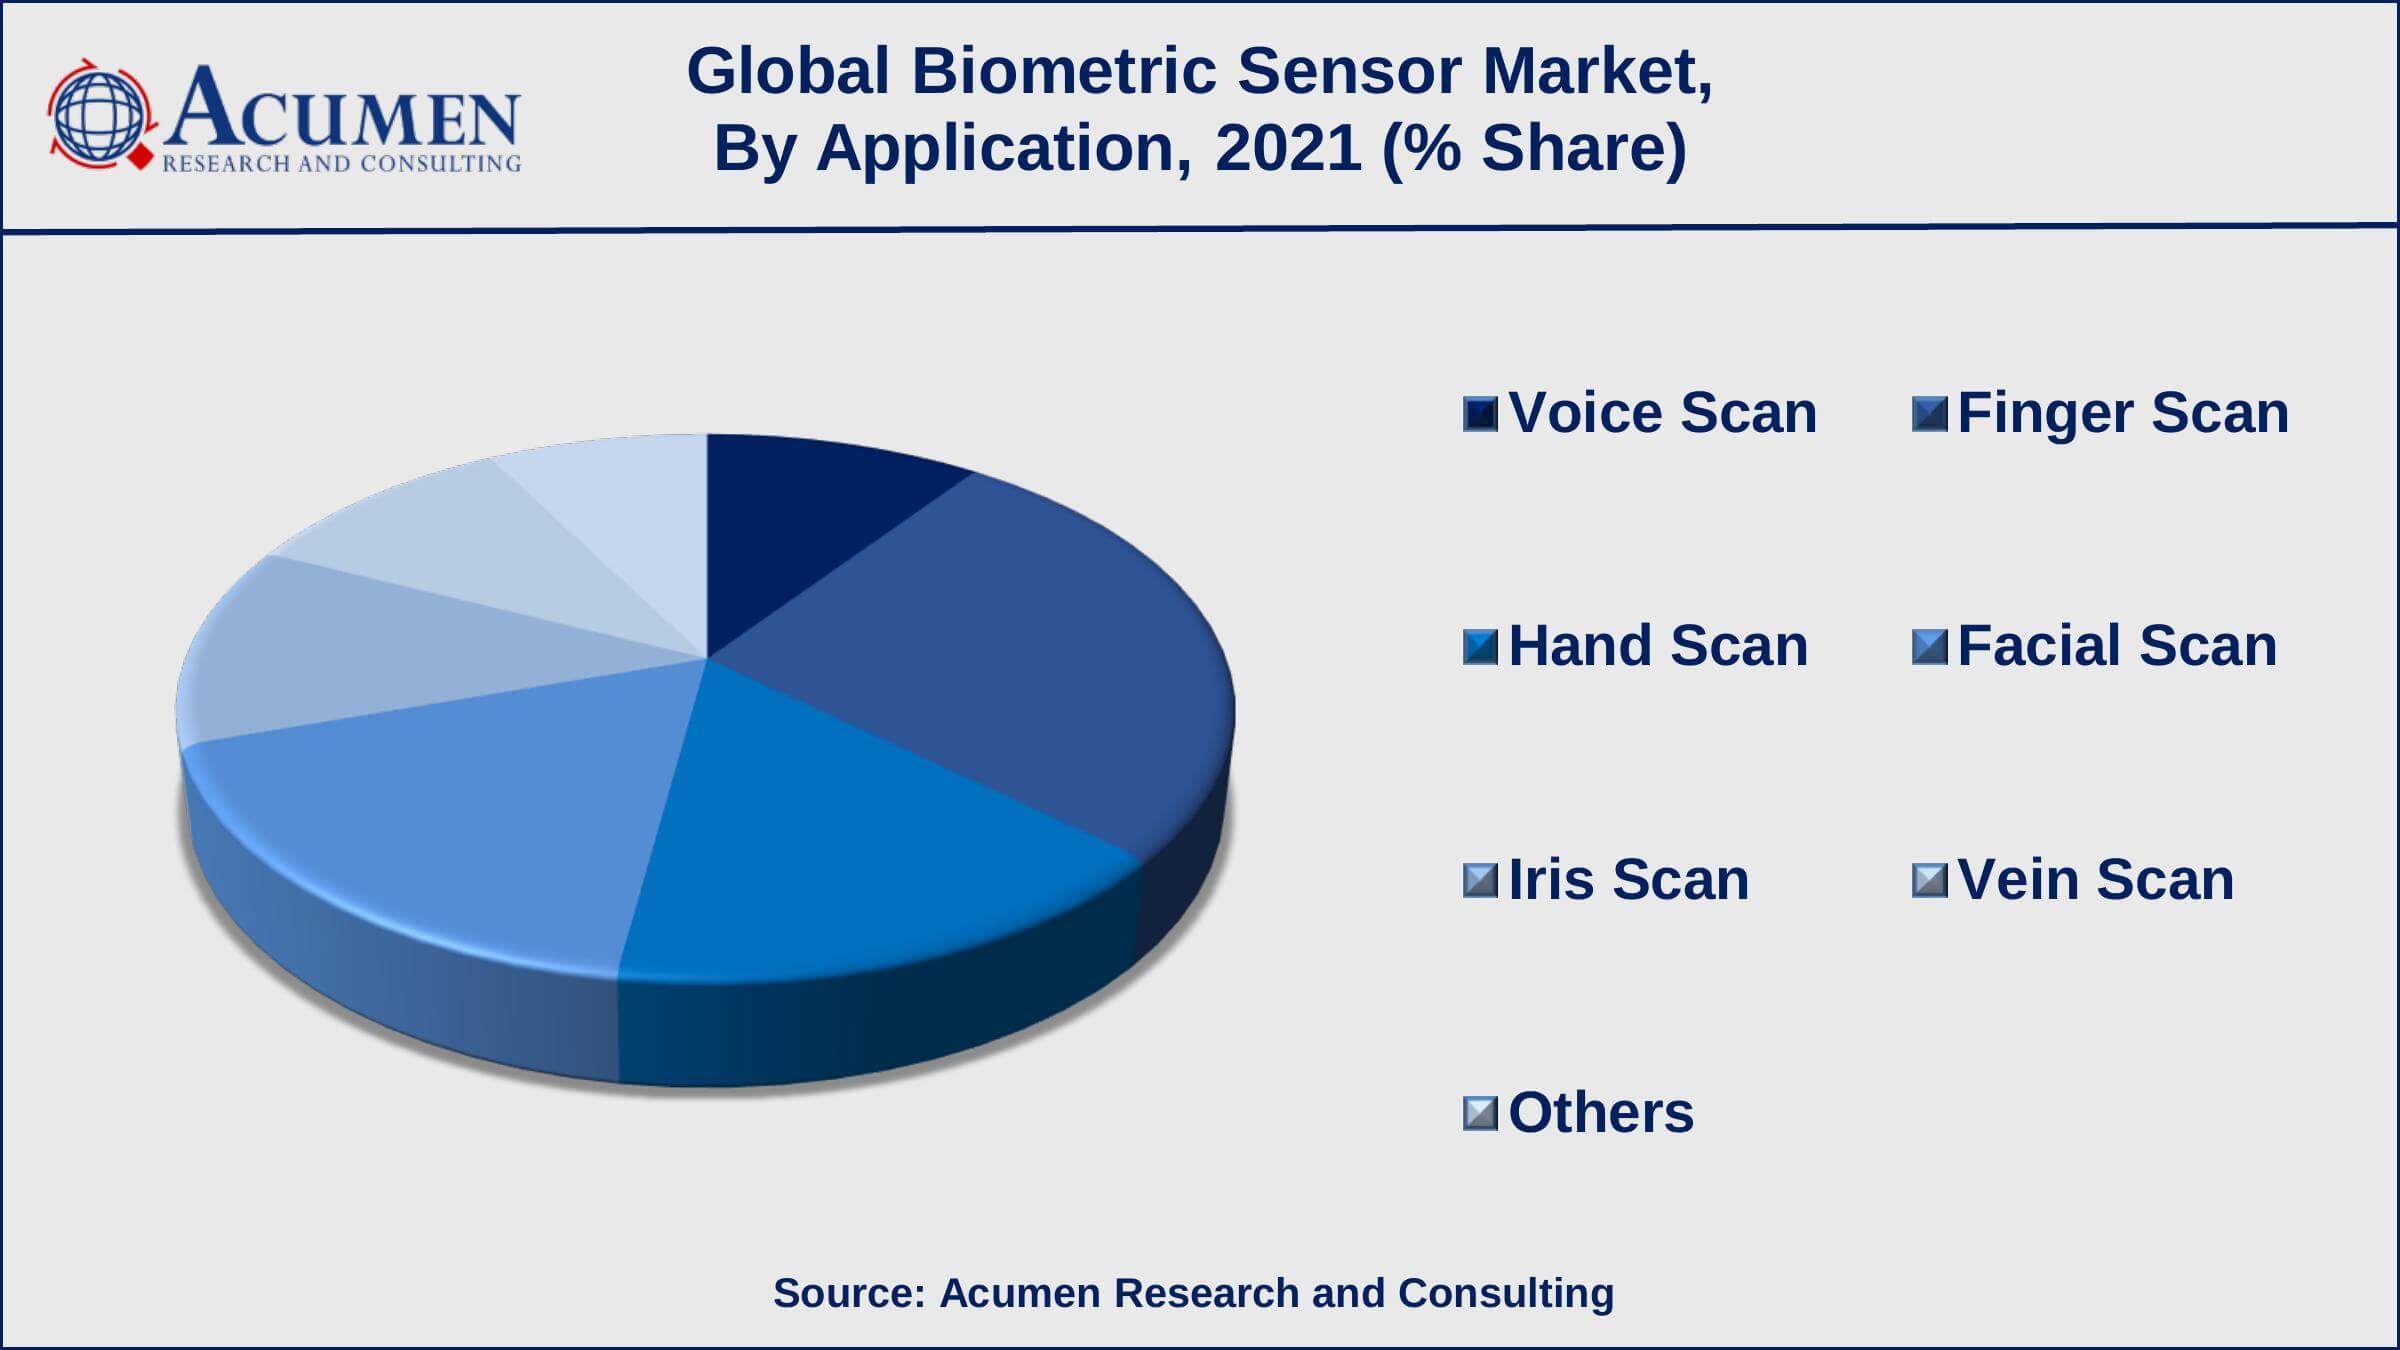 Among application, the finger scan sub-segment collected revenue of around USD 356 million in 2021